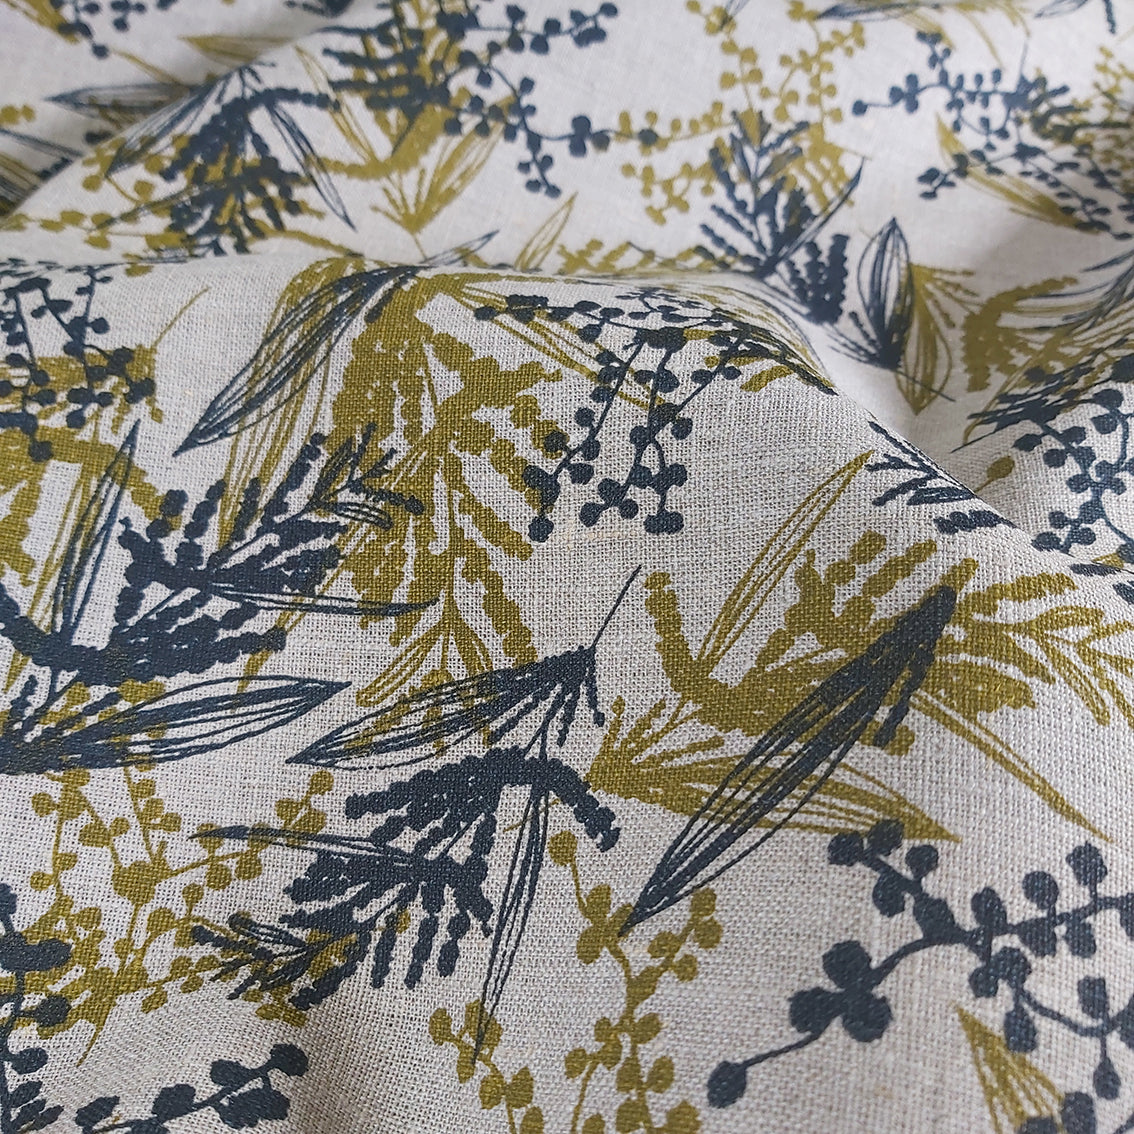 Mixed wattle screenprint on flax linen in olive oil and indigo. Designed and printed by Femke Textiles.